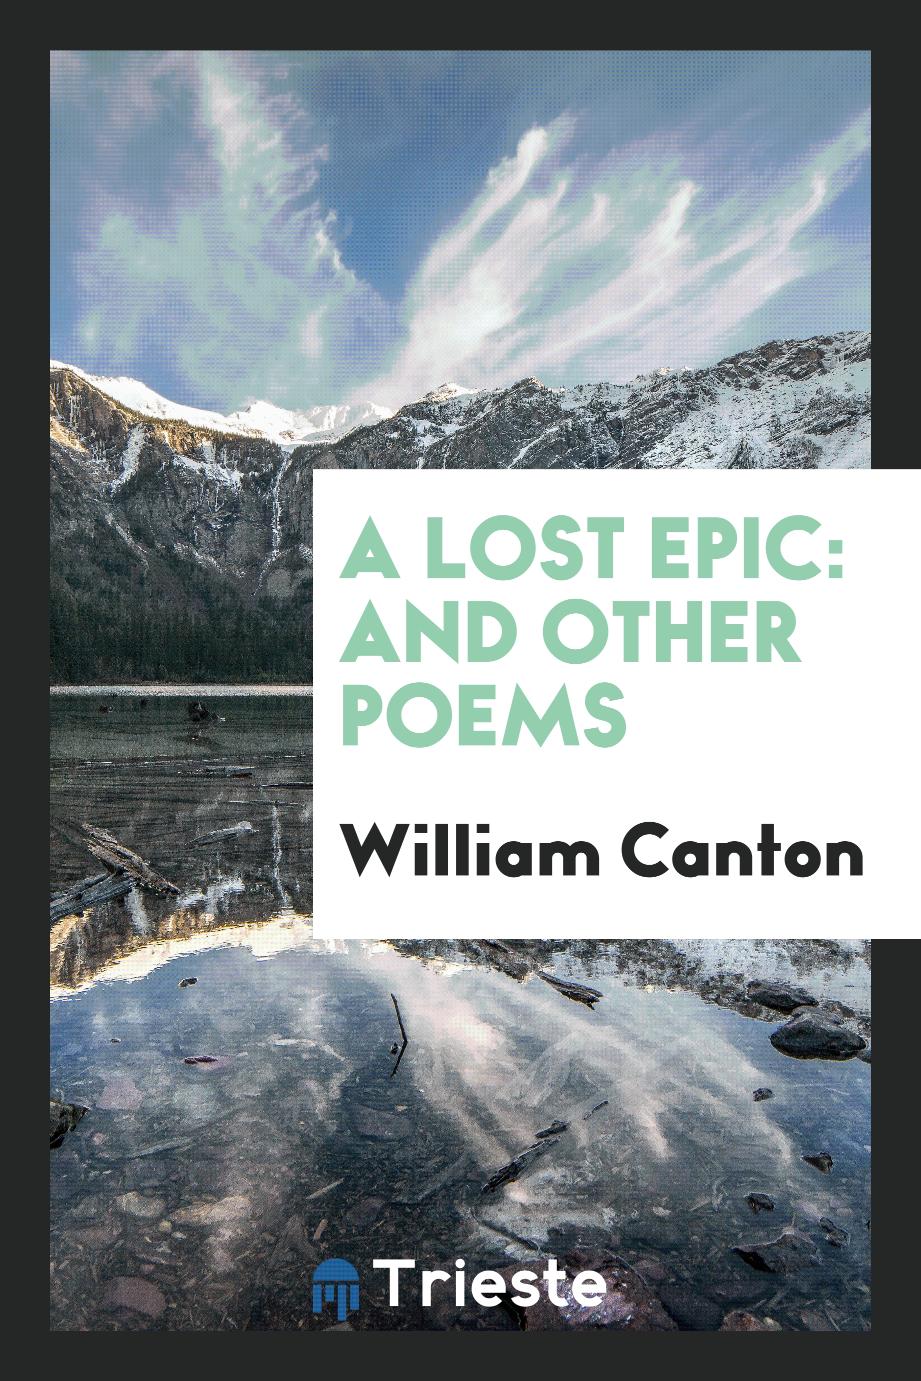 A Lost Epic: And Other Poems